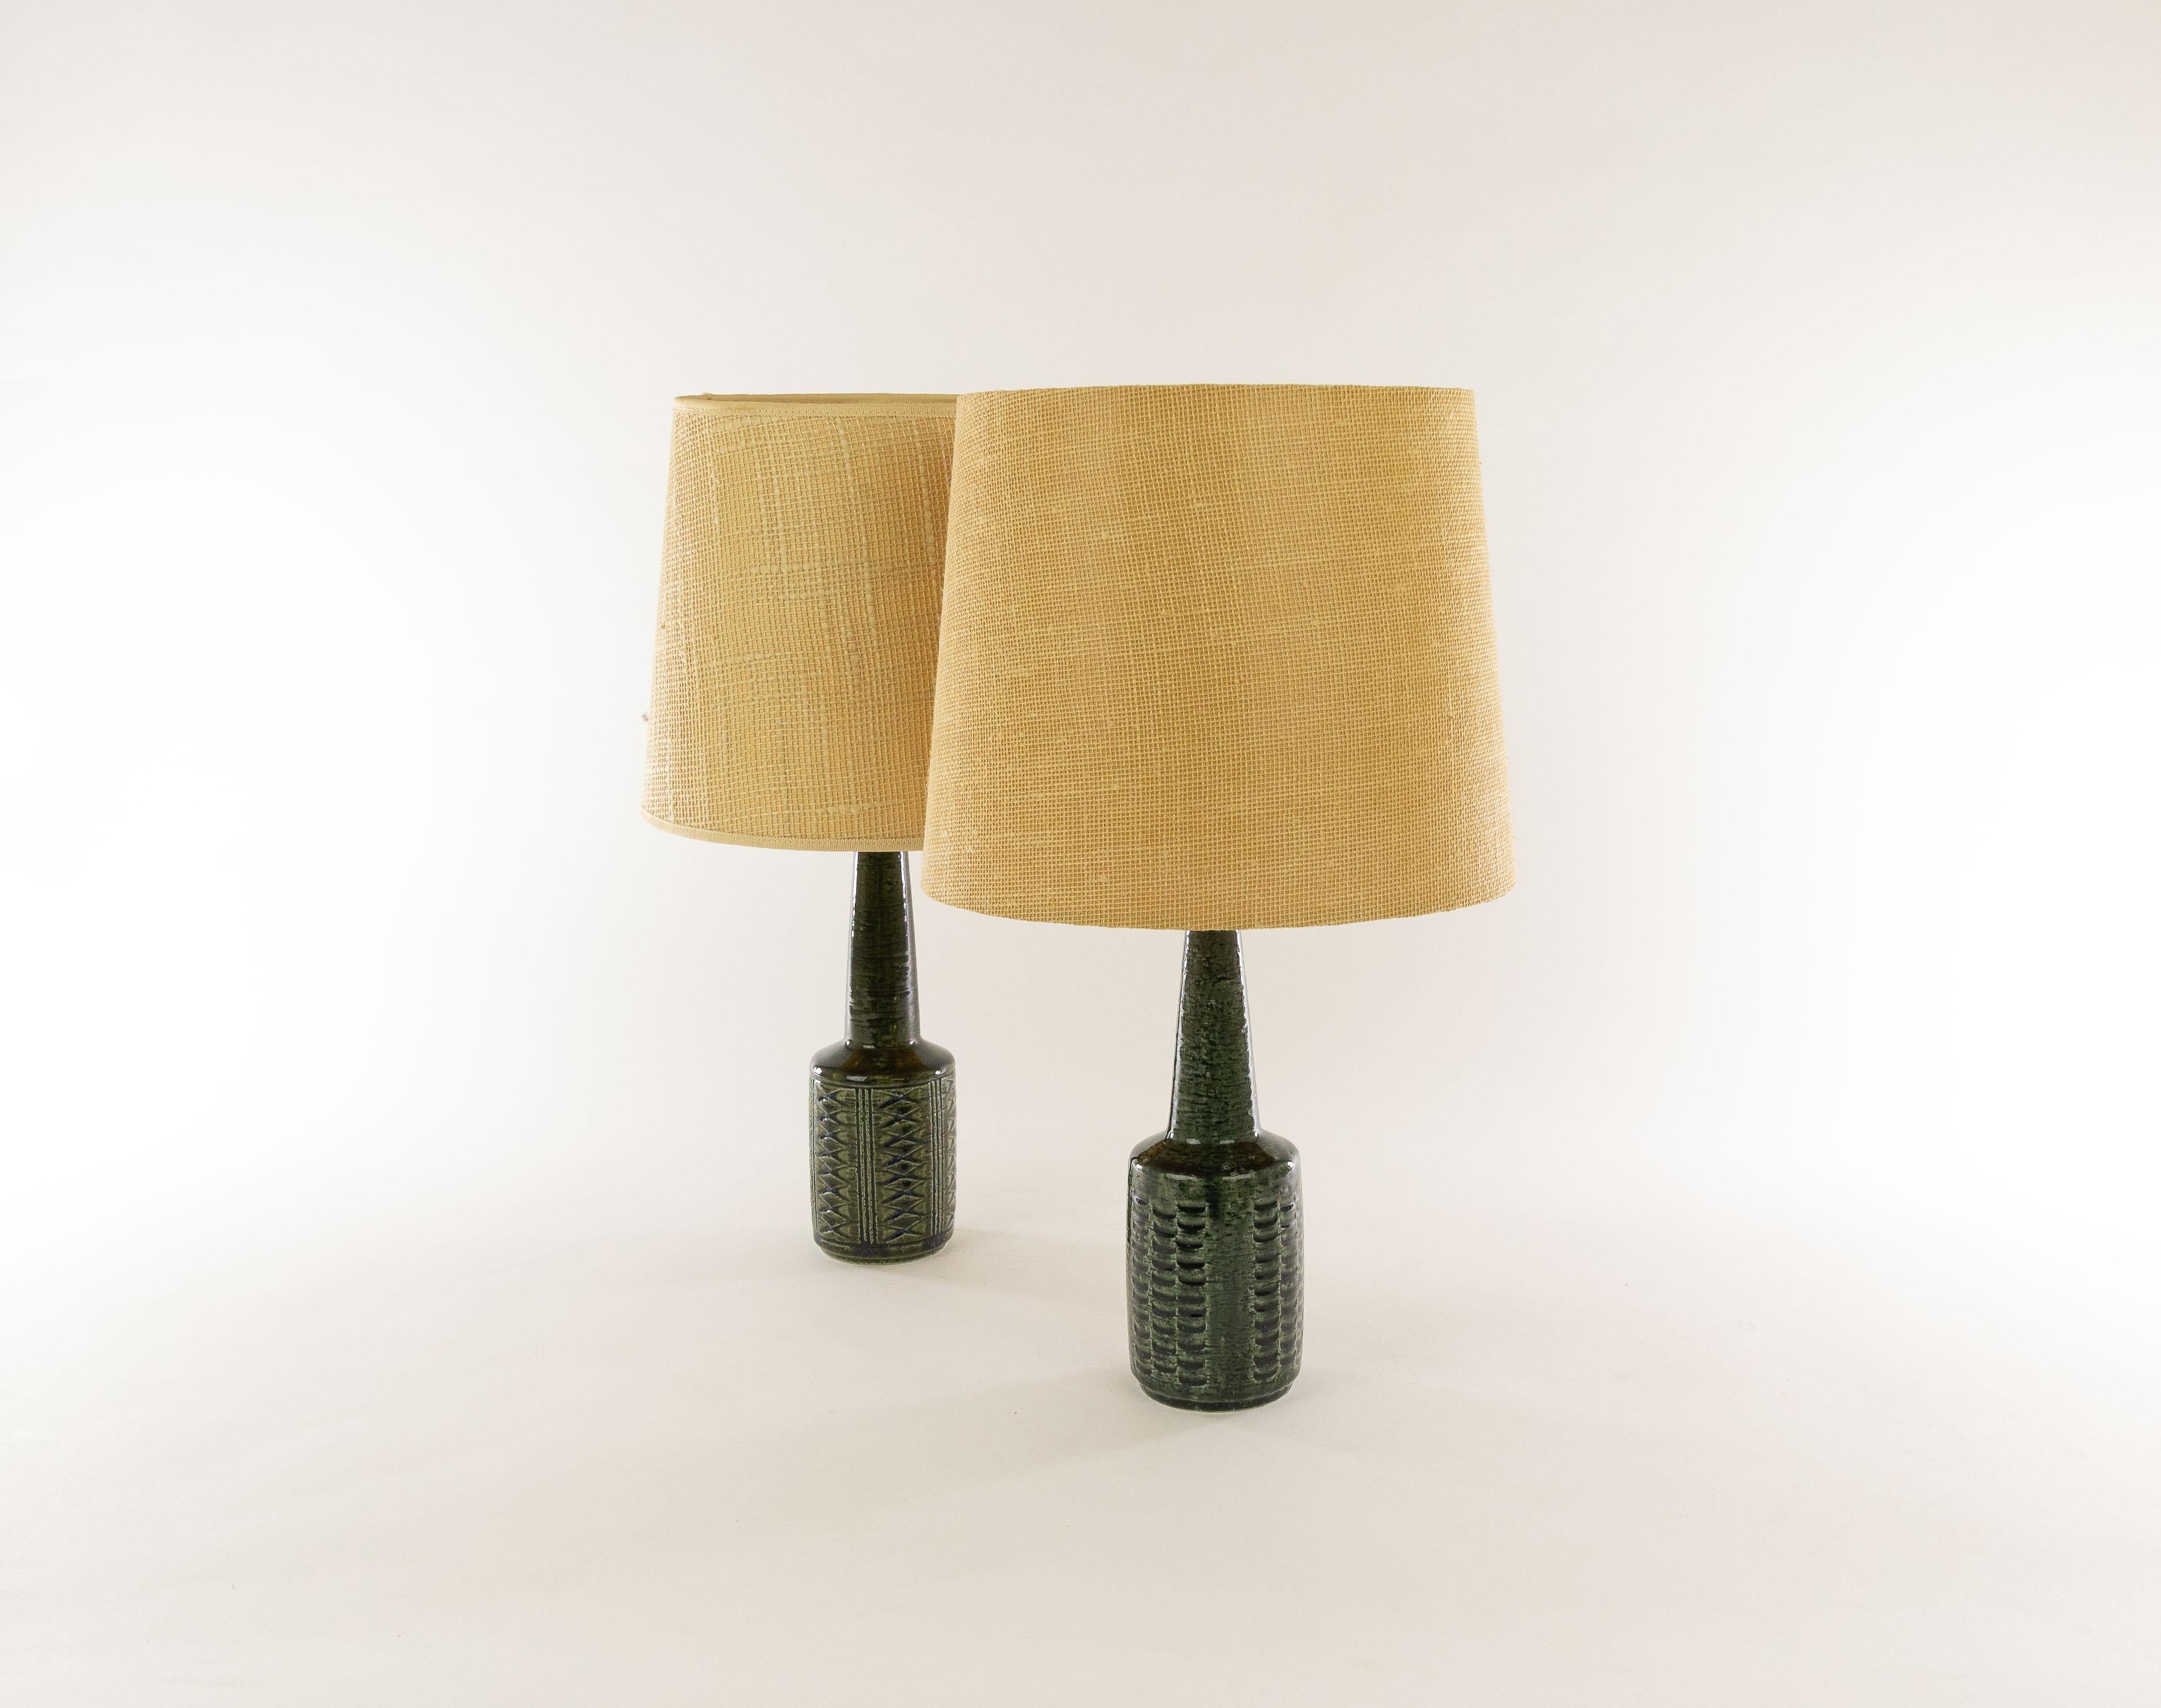 Two charming Danish chamotte (texture clay) table lamps model DL/21 with impressed decoration by Annelise and Per Linnemann-Schmidt for Palshus, Denmark, 1960s.

Palshus produced a wide range of table lamps, in different patterns, height and